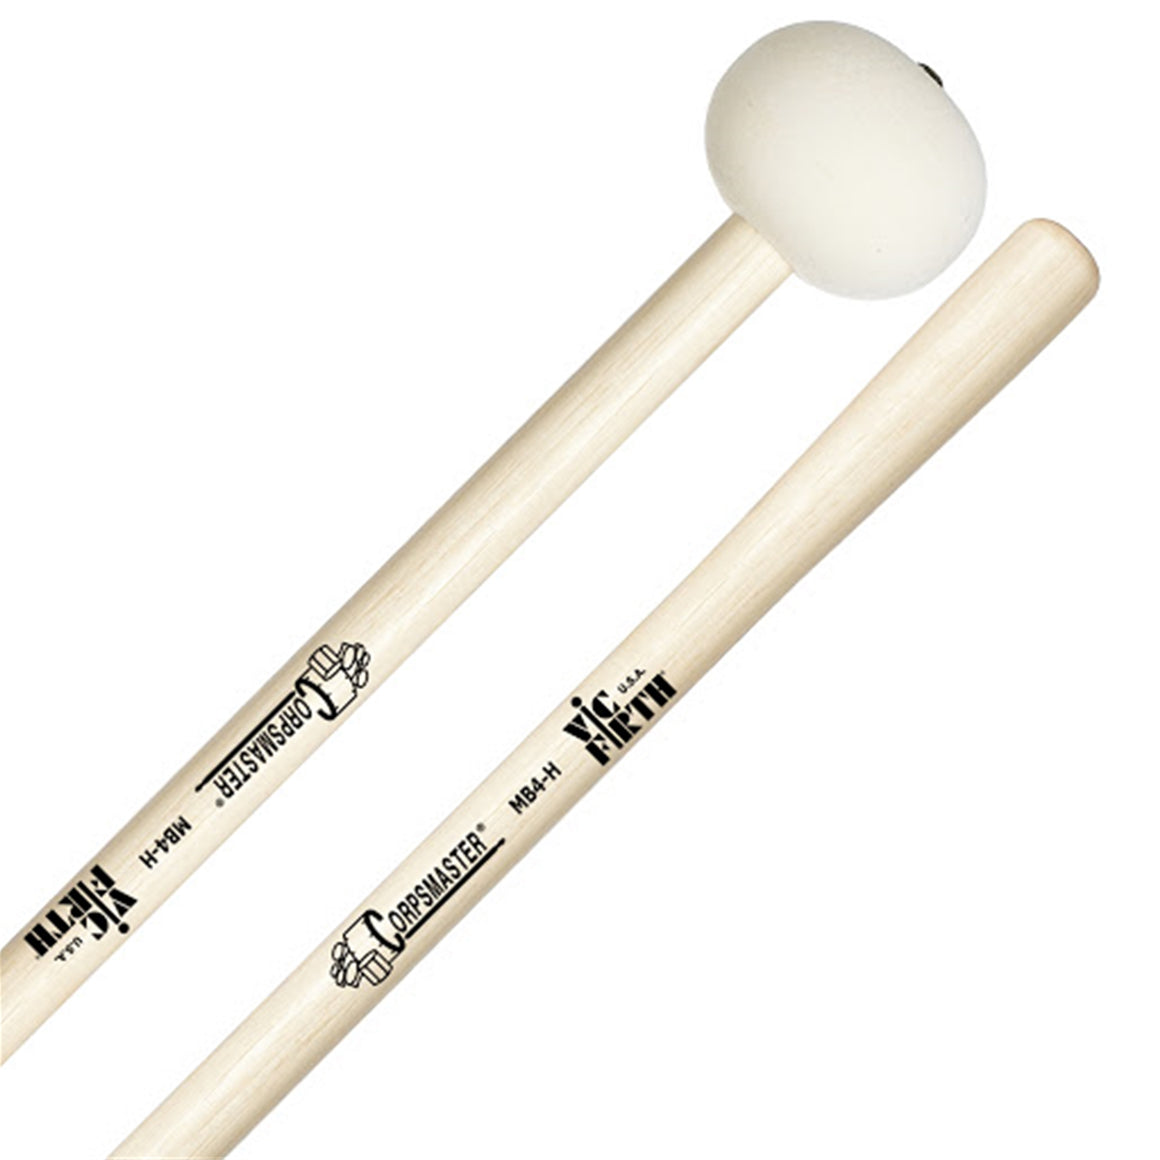 VIC FIRTH VFMB4H Corpsmaster Marching Bass Mallets, X-Large